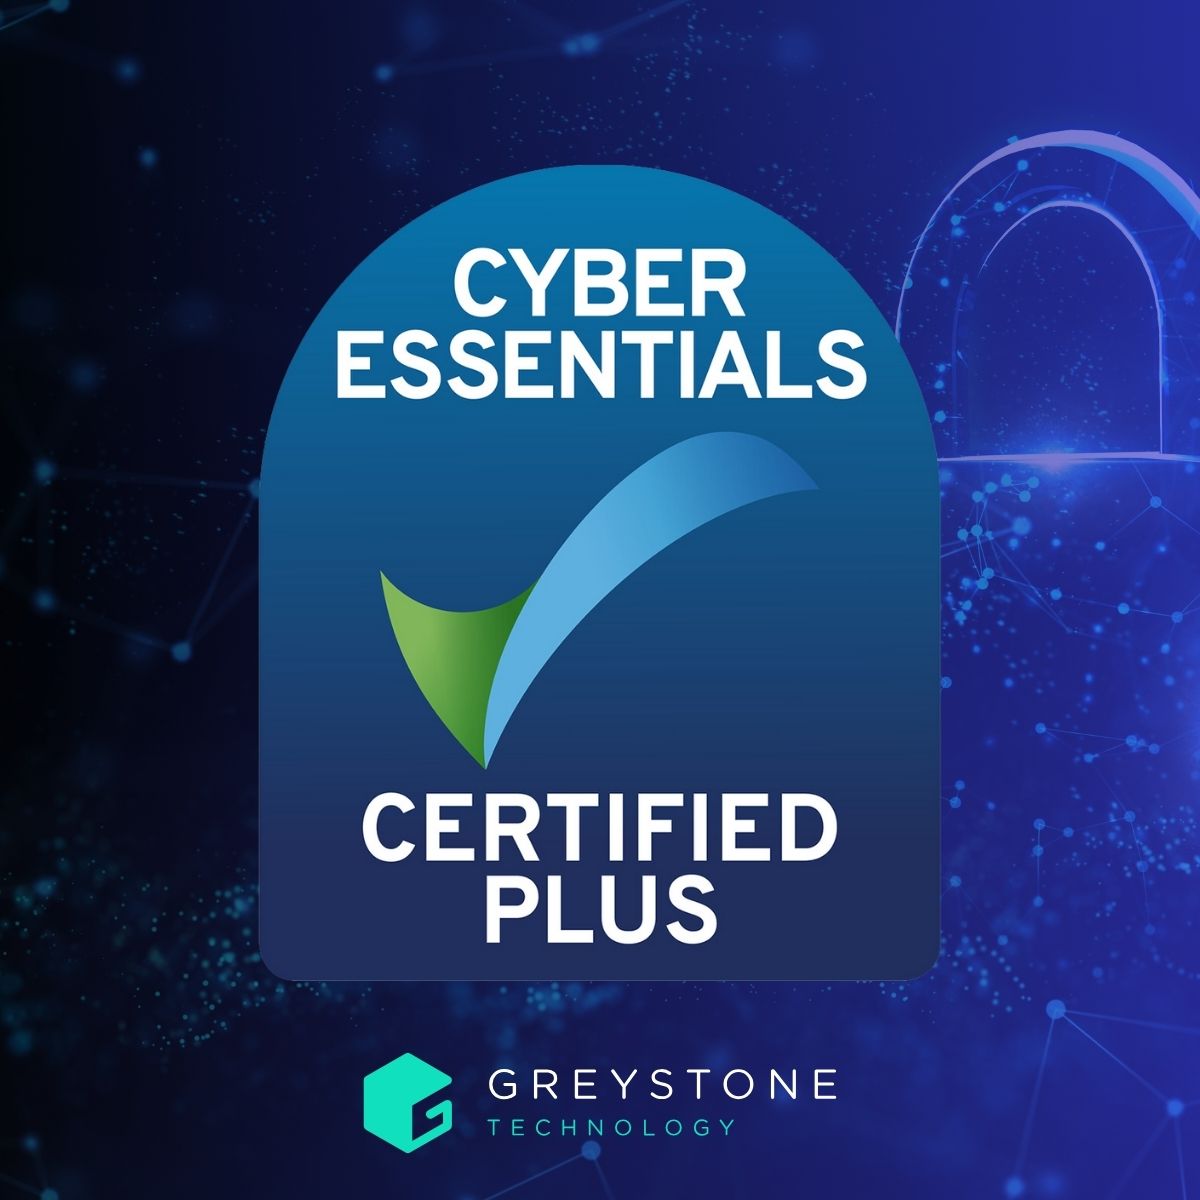 🎉 We're delighted to announce that we've successfully passed our Cyber Essentials Plus renewal audit this week!

greystone.co.uk/it-services/cy… 

#CyberSecurity #CyberEssentialsPlus #ITSecurity #DataProtection #CyberResilience #itmanagedservices #cloudcomputing #DigitalTransformation